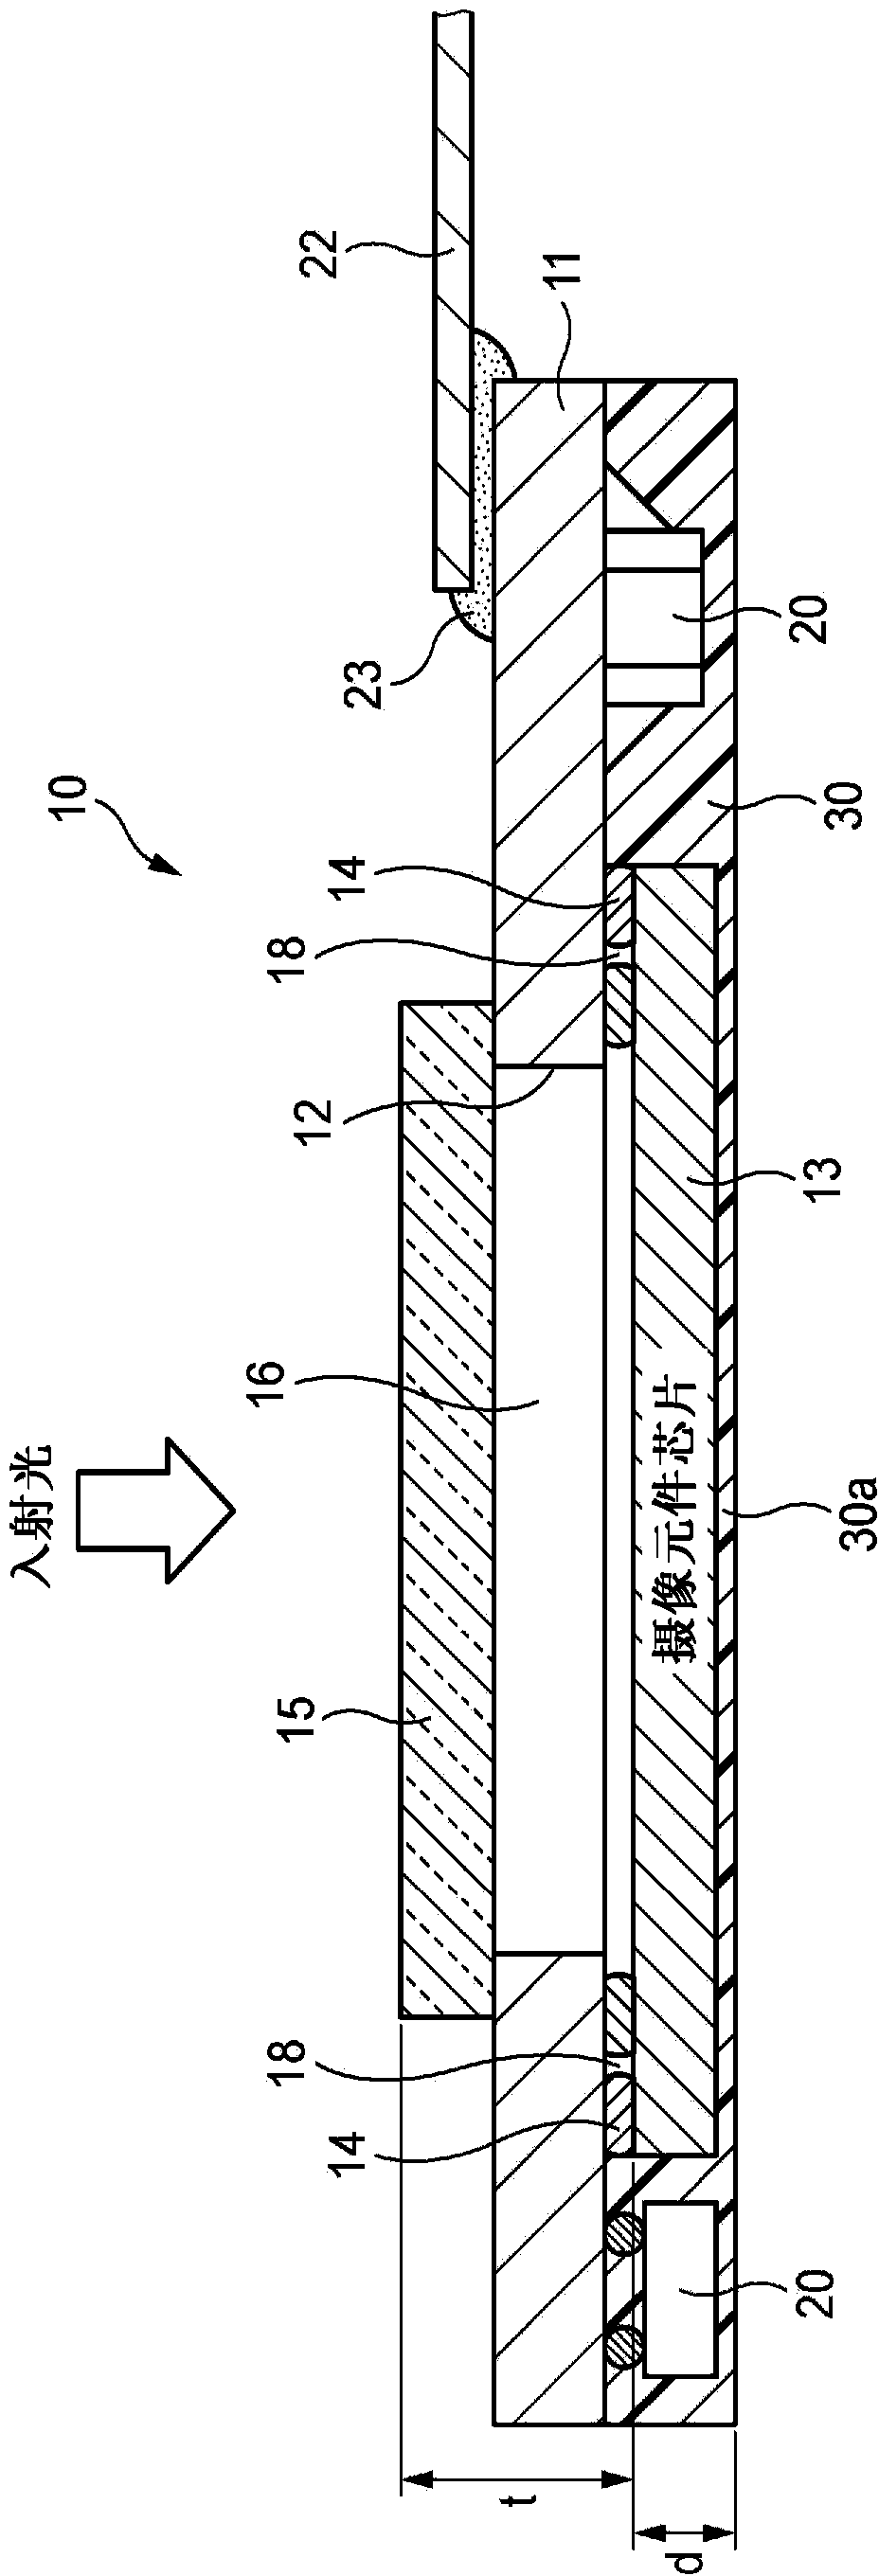 Imaging element module and method for manufacturing same